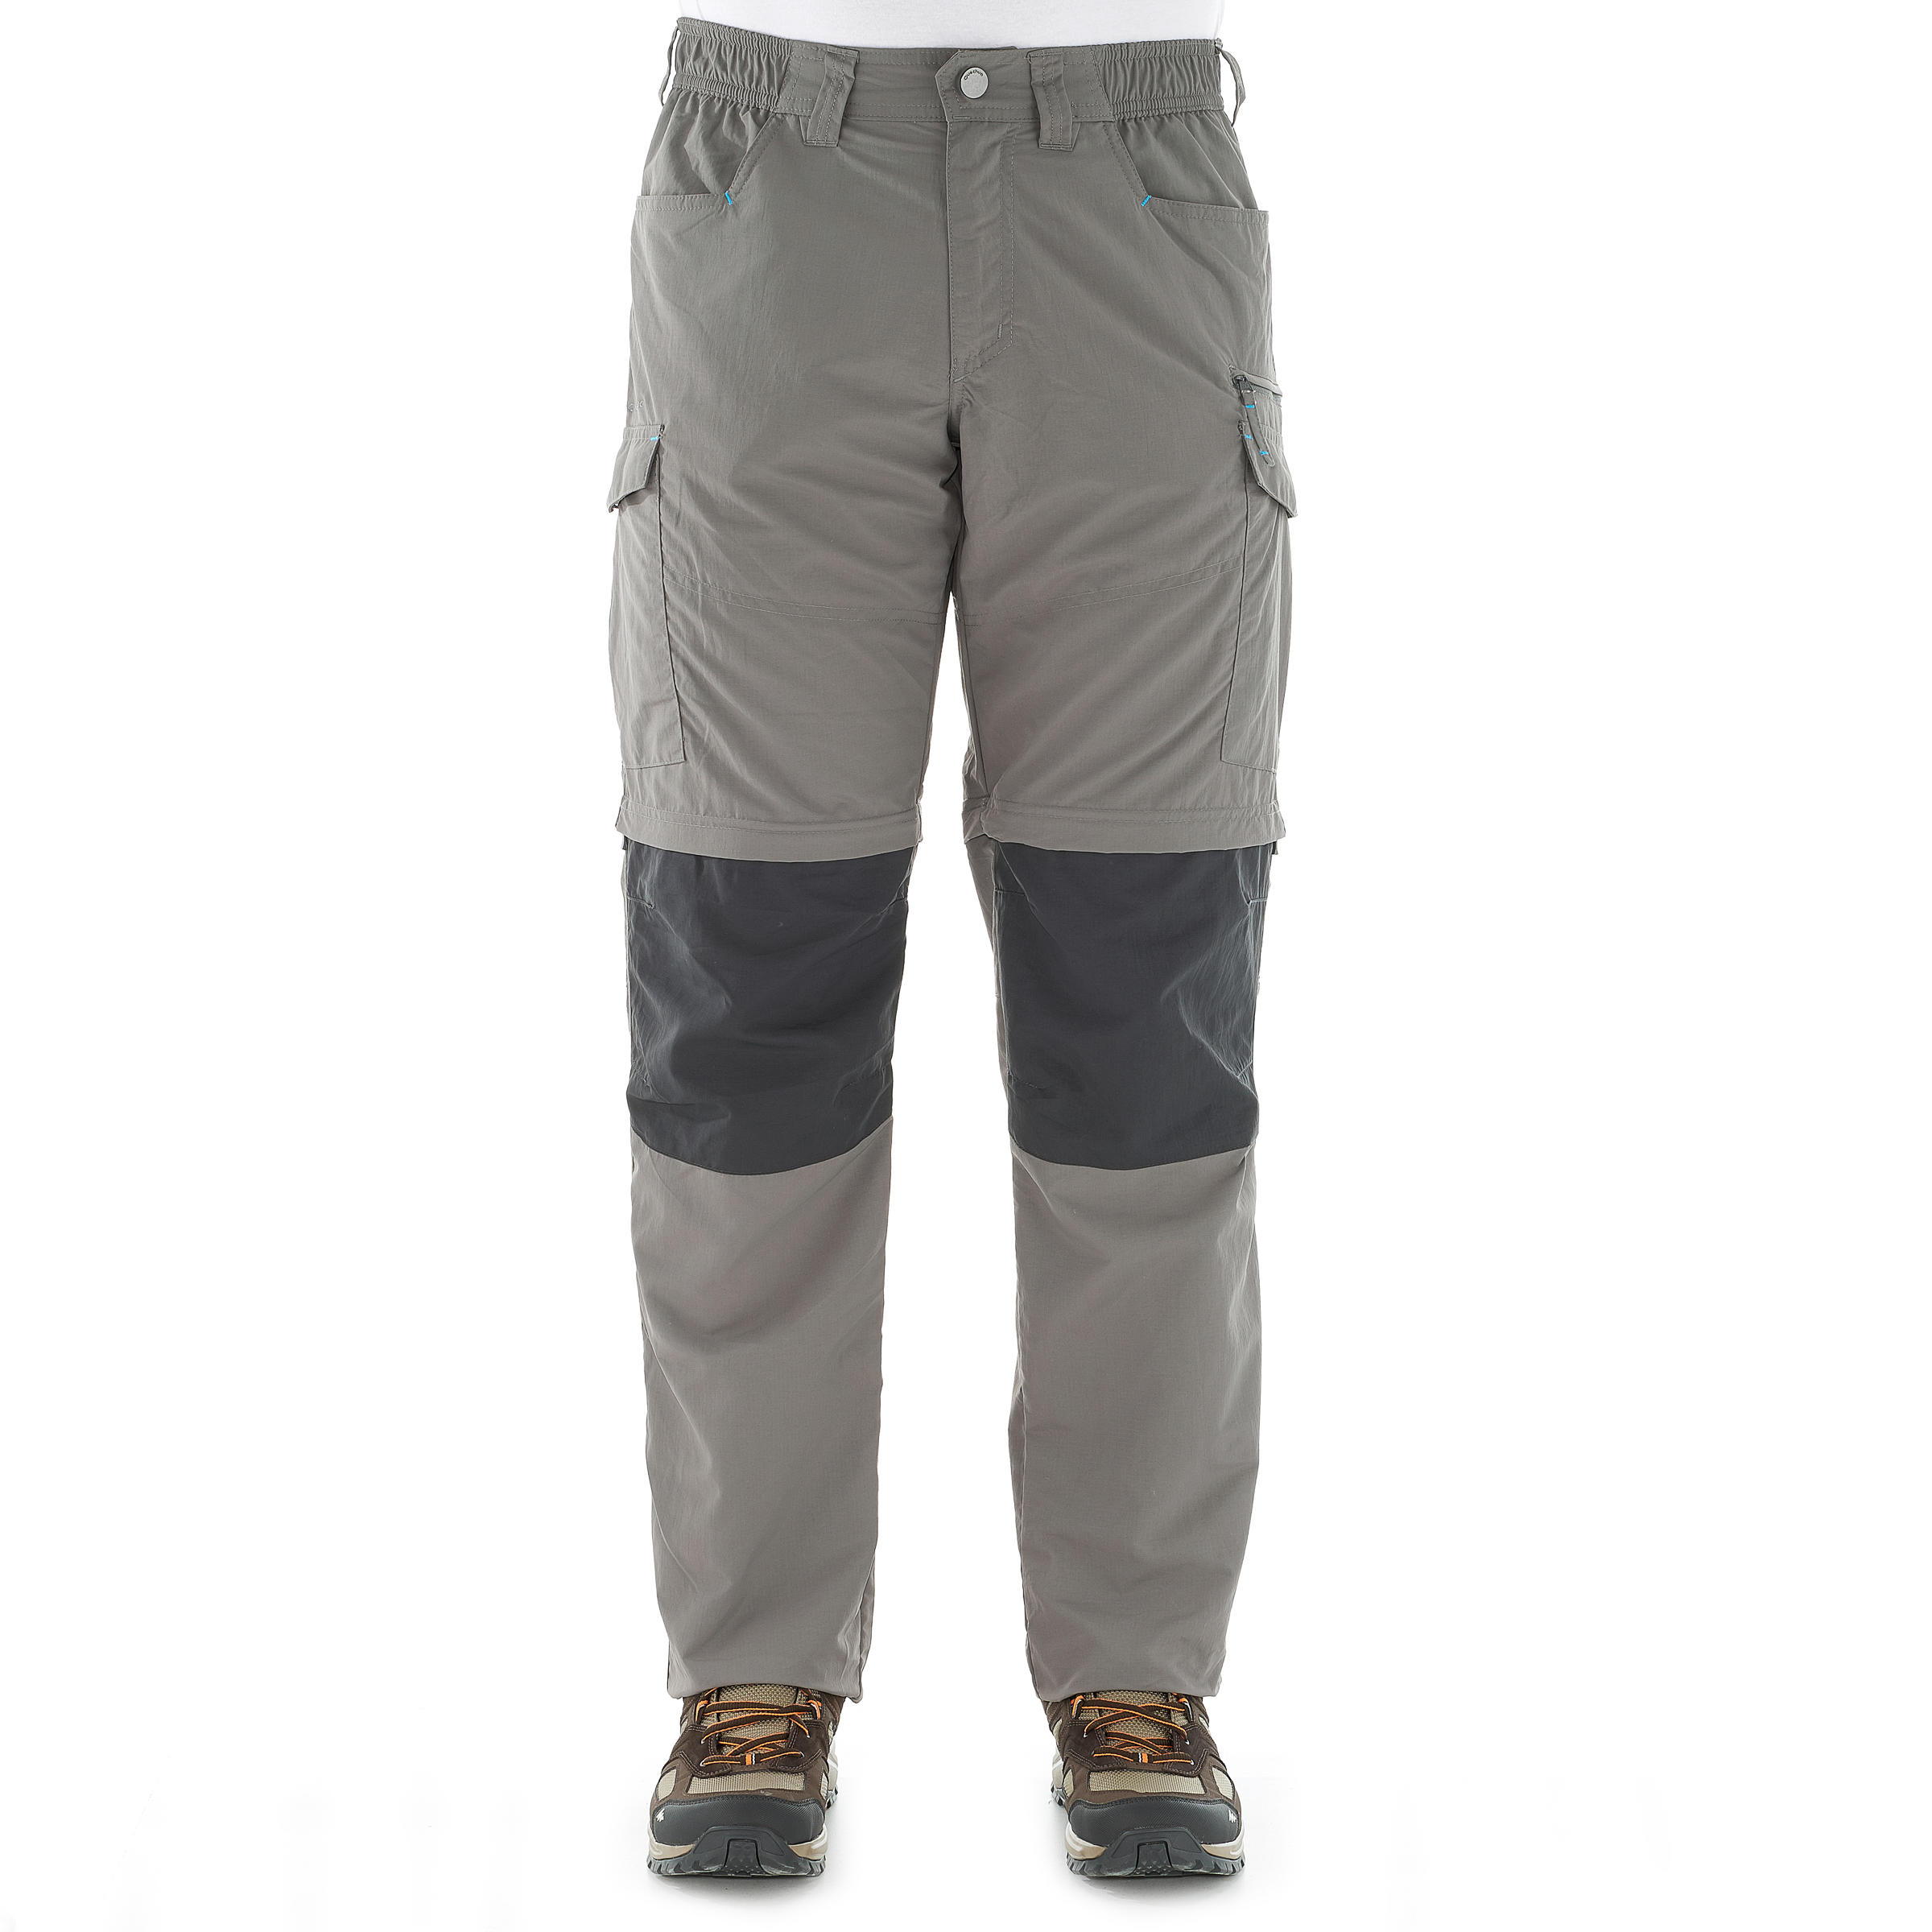 Forclaz 100 convertible hiking trousers - Light Grey 3/19